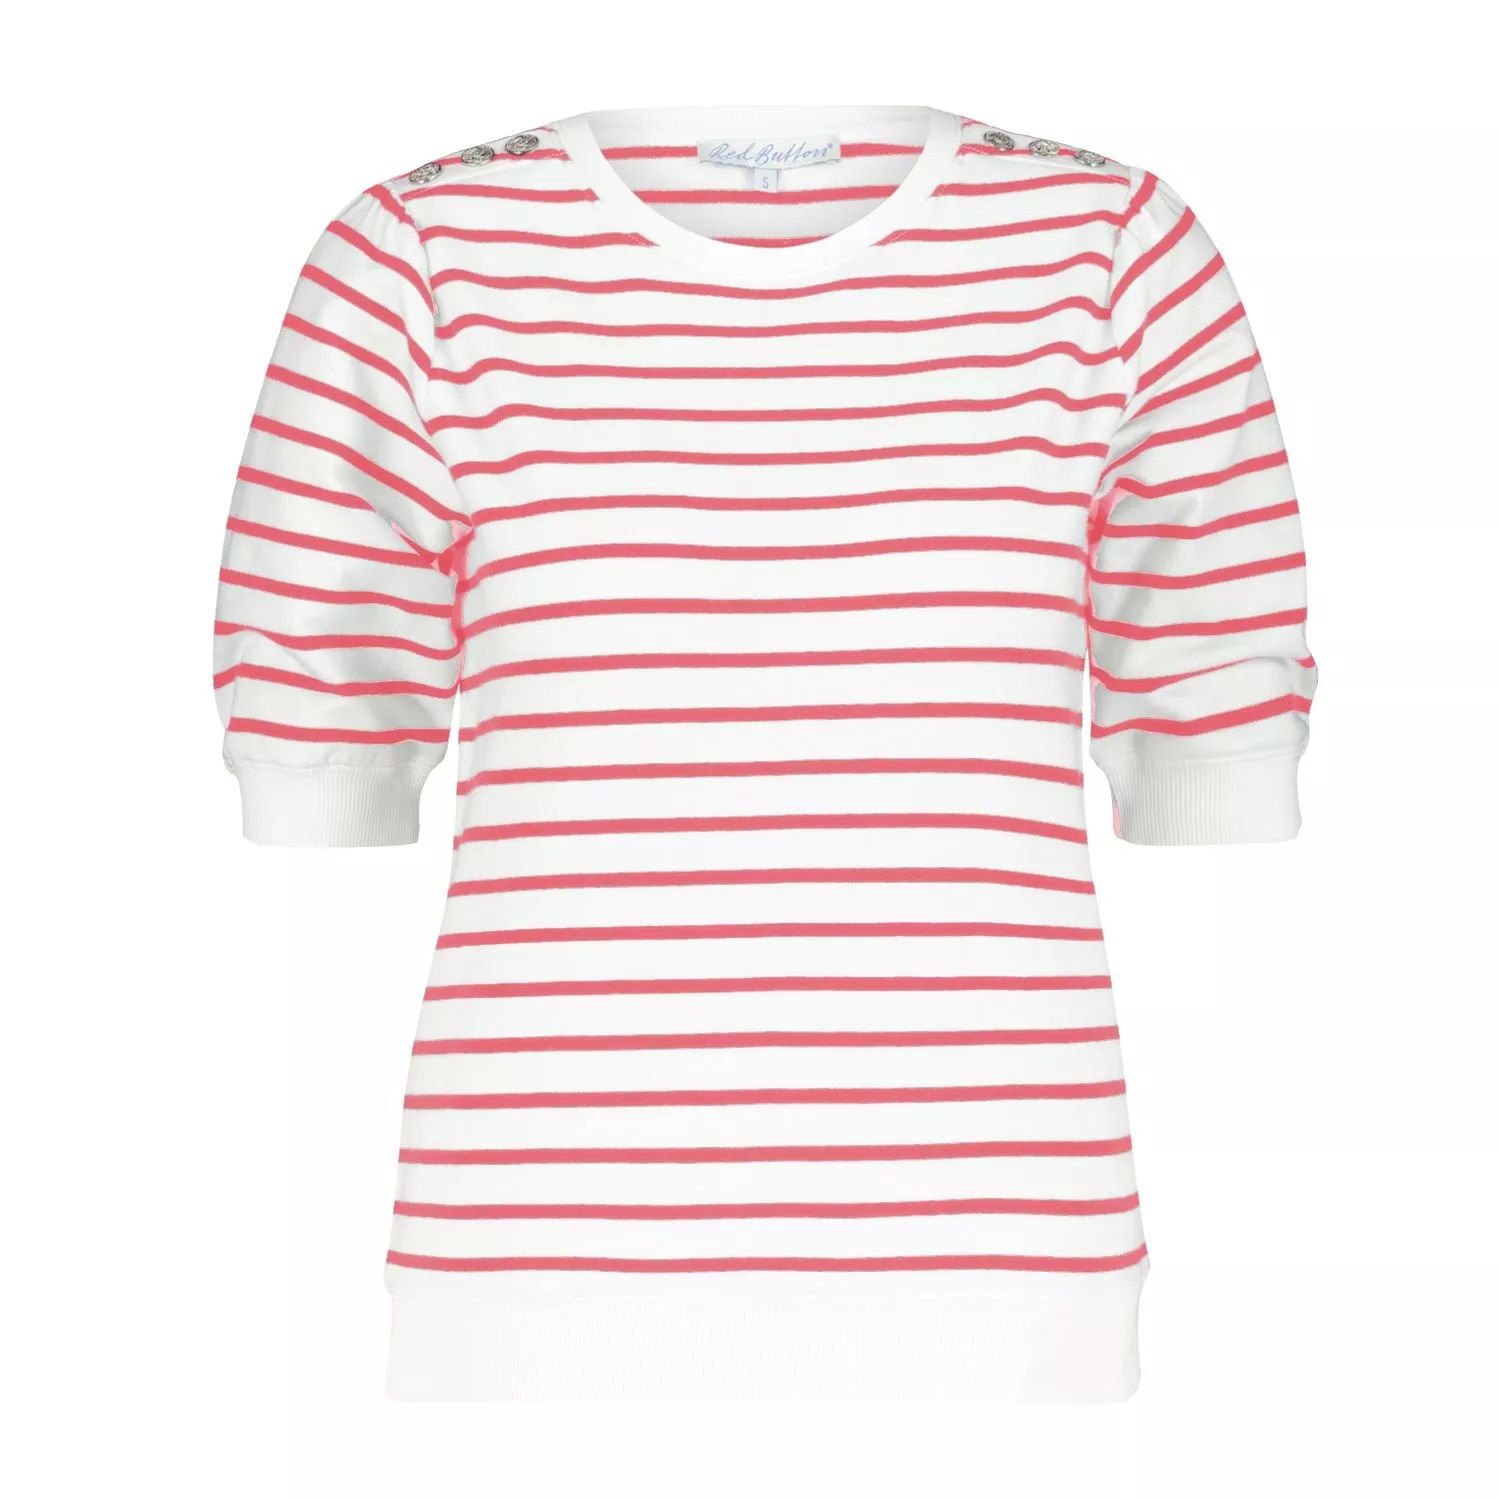 Red Button Terry stripe short sleeve coral267 2900141058053